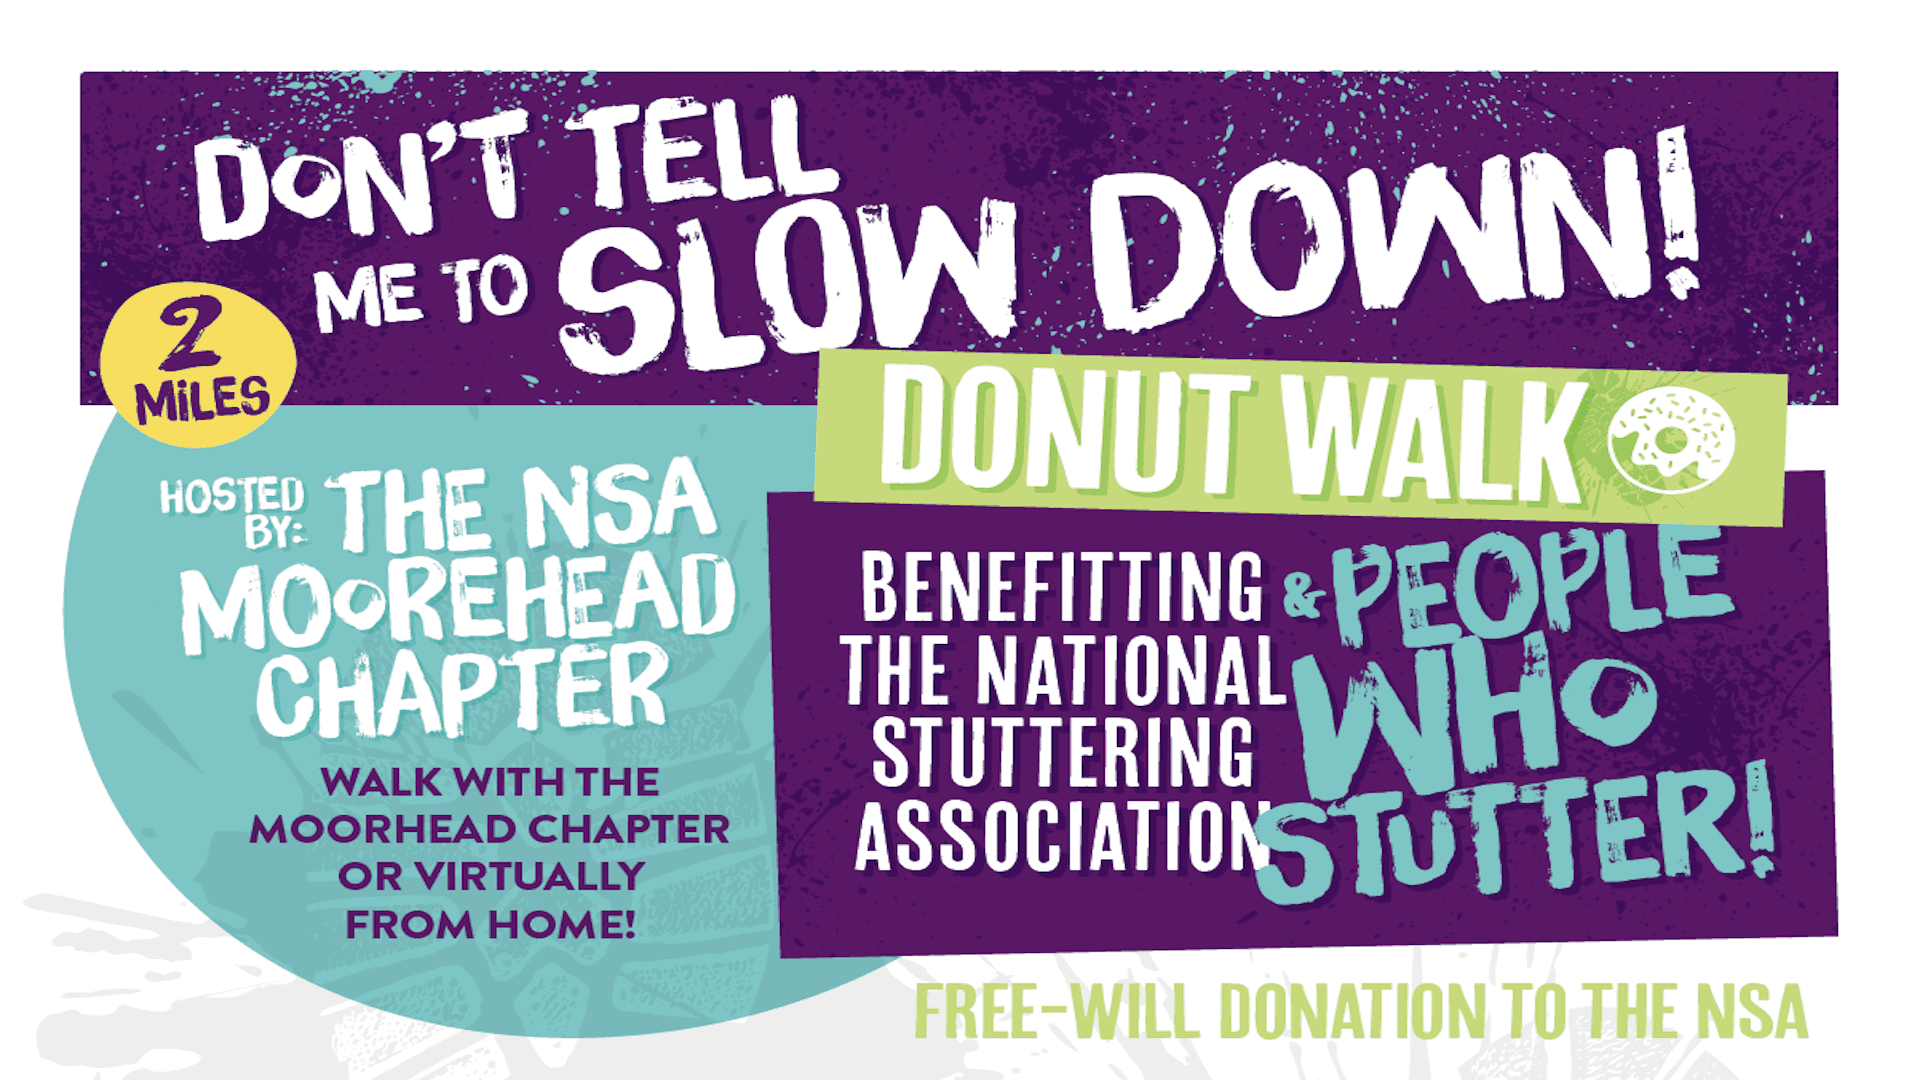 Colorful promotional poster for the "donut walk" event supporting the national stuttering association, titled "don't tell me to slow down," with options to participate in-person or virtually.